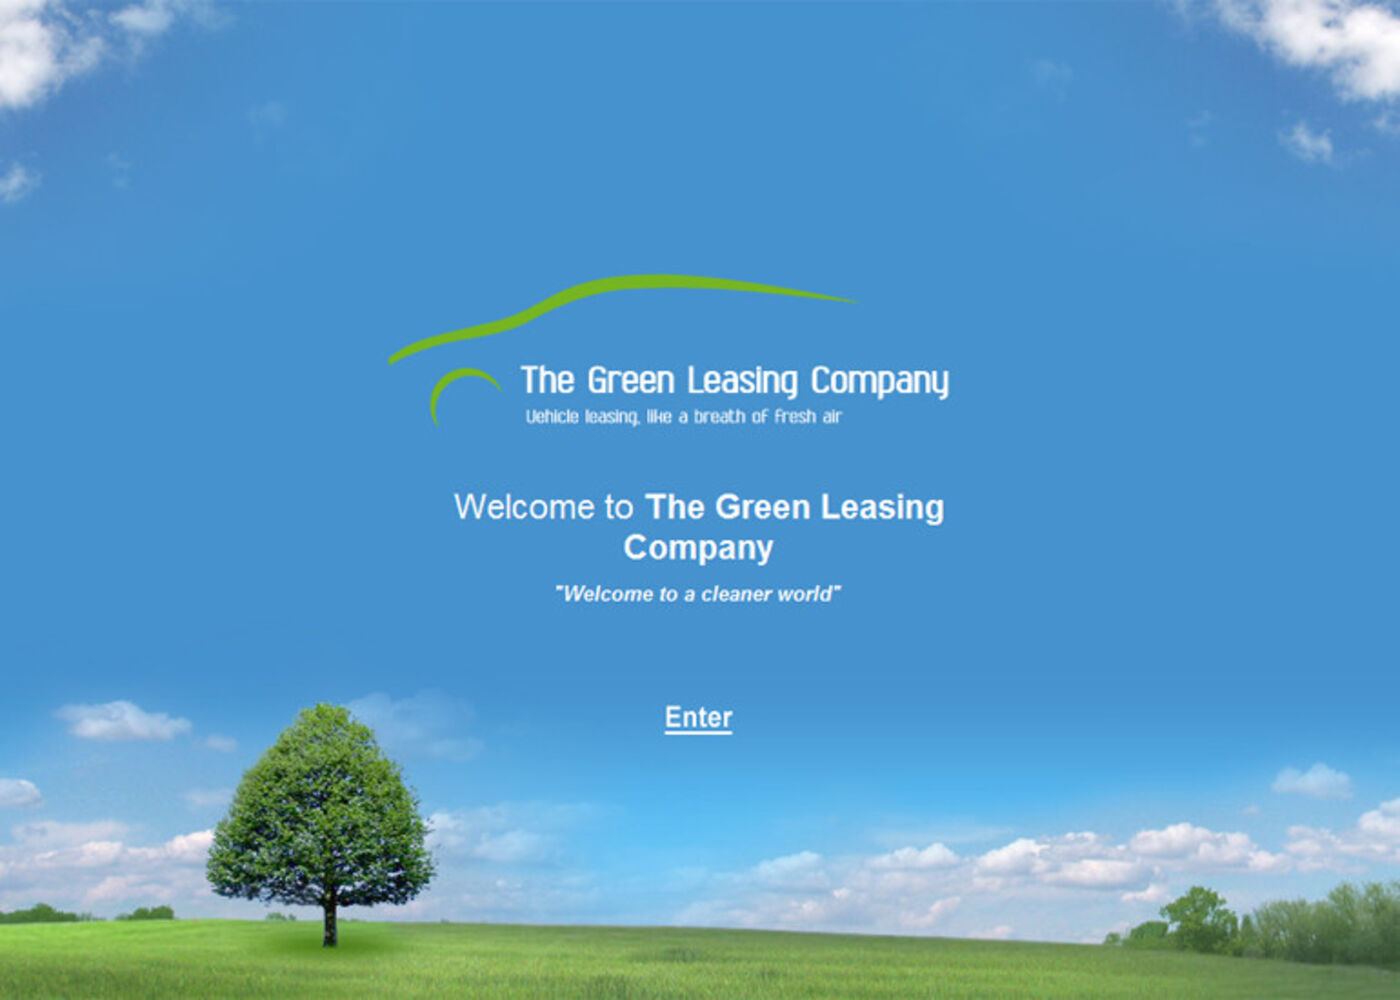 The Green Leasing Company Welcome